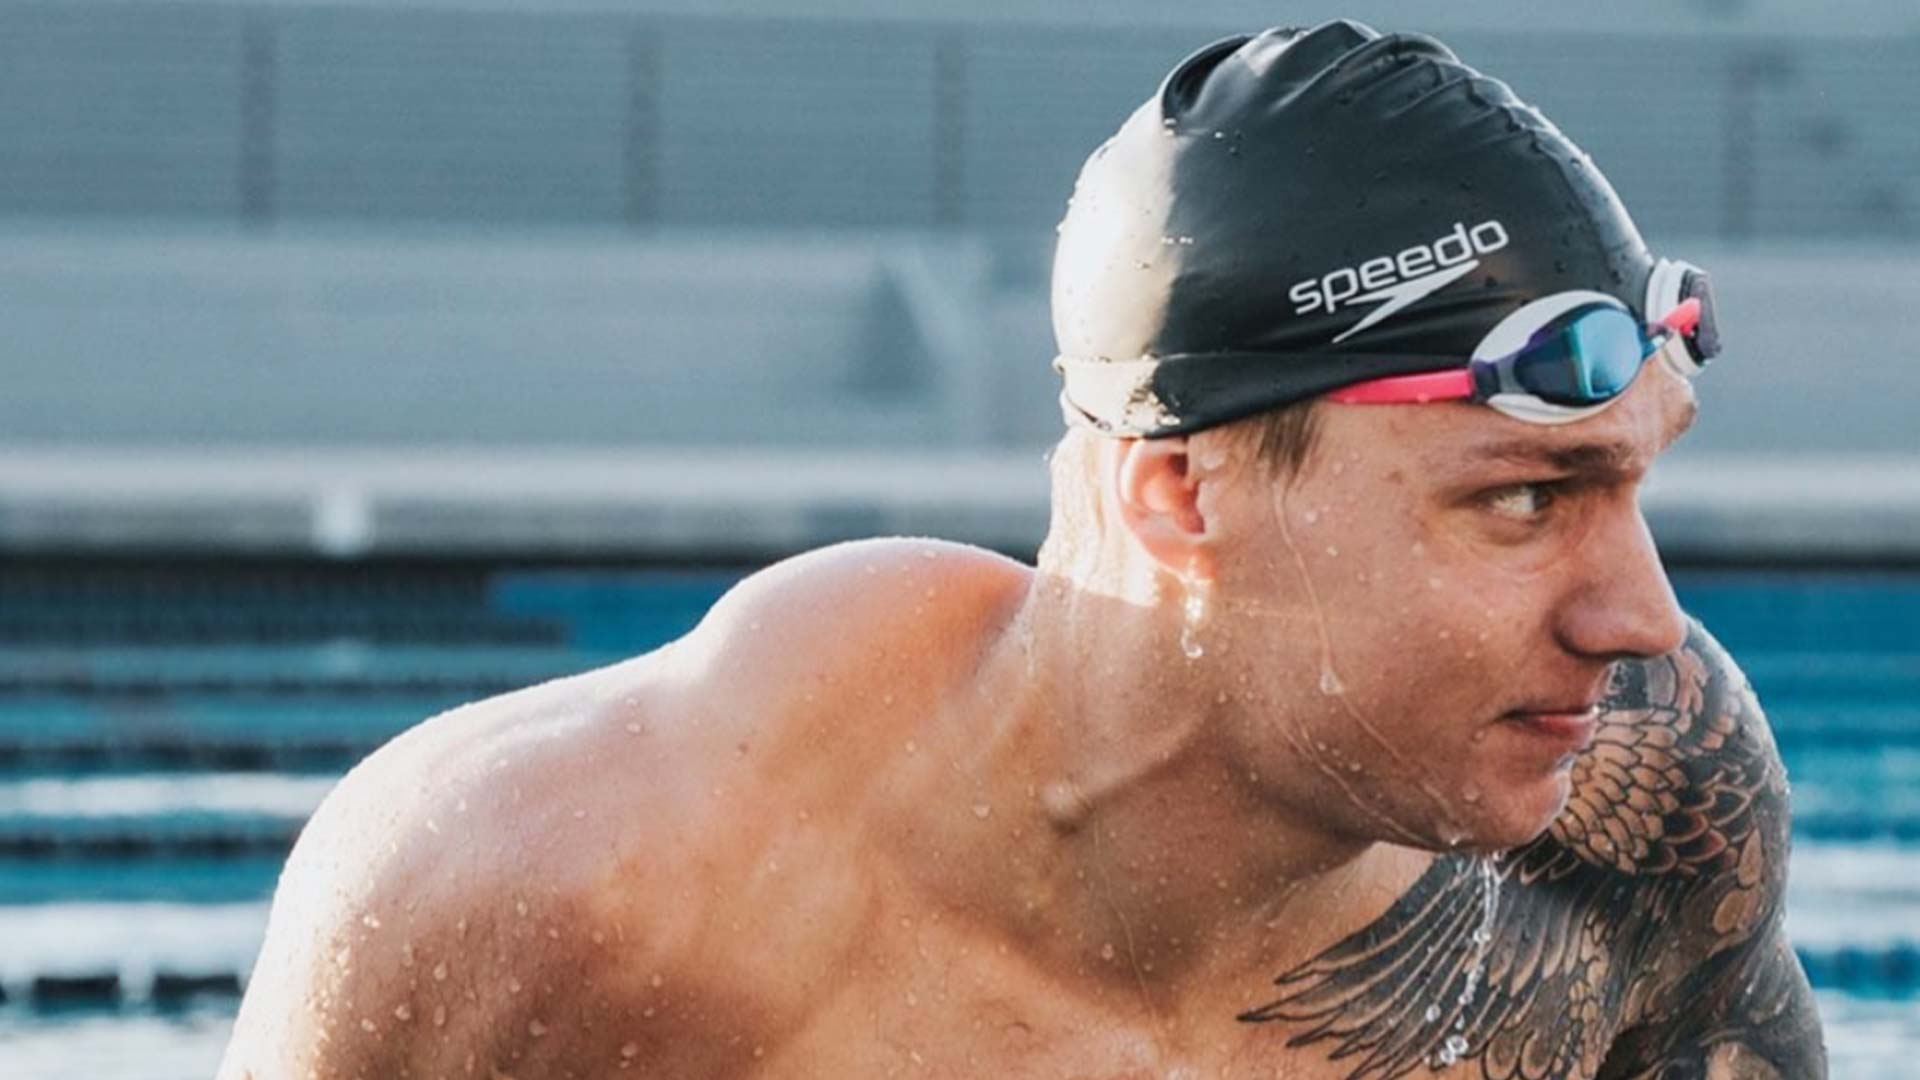 Olympic swimmer Caeleb Dressel says the key to success is making your bed